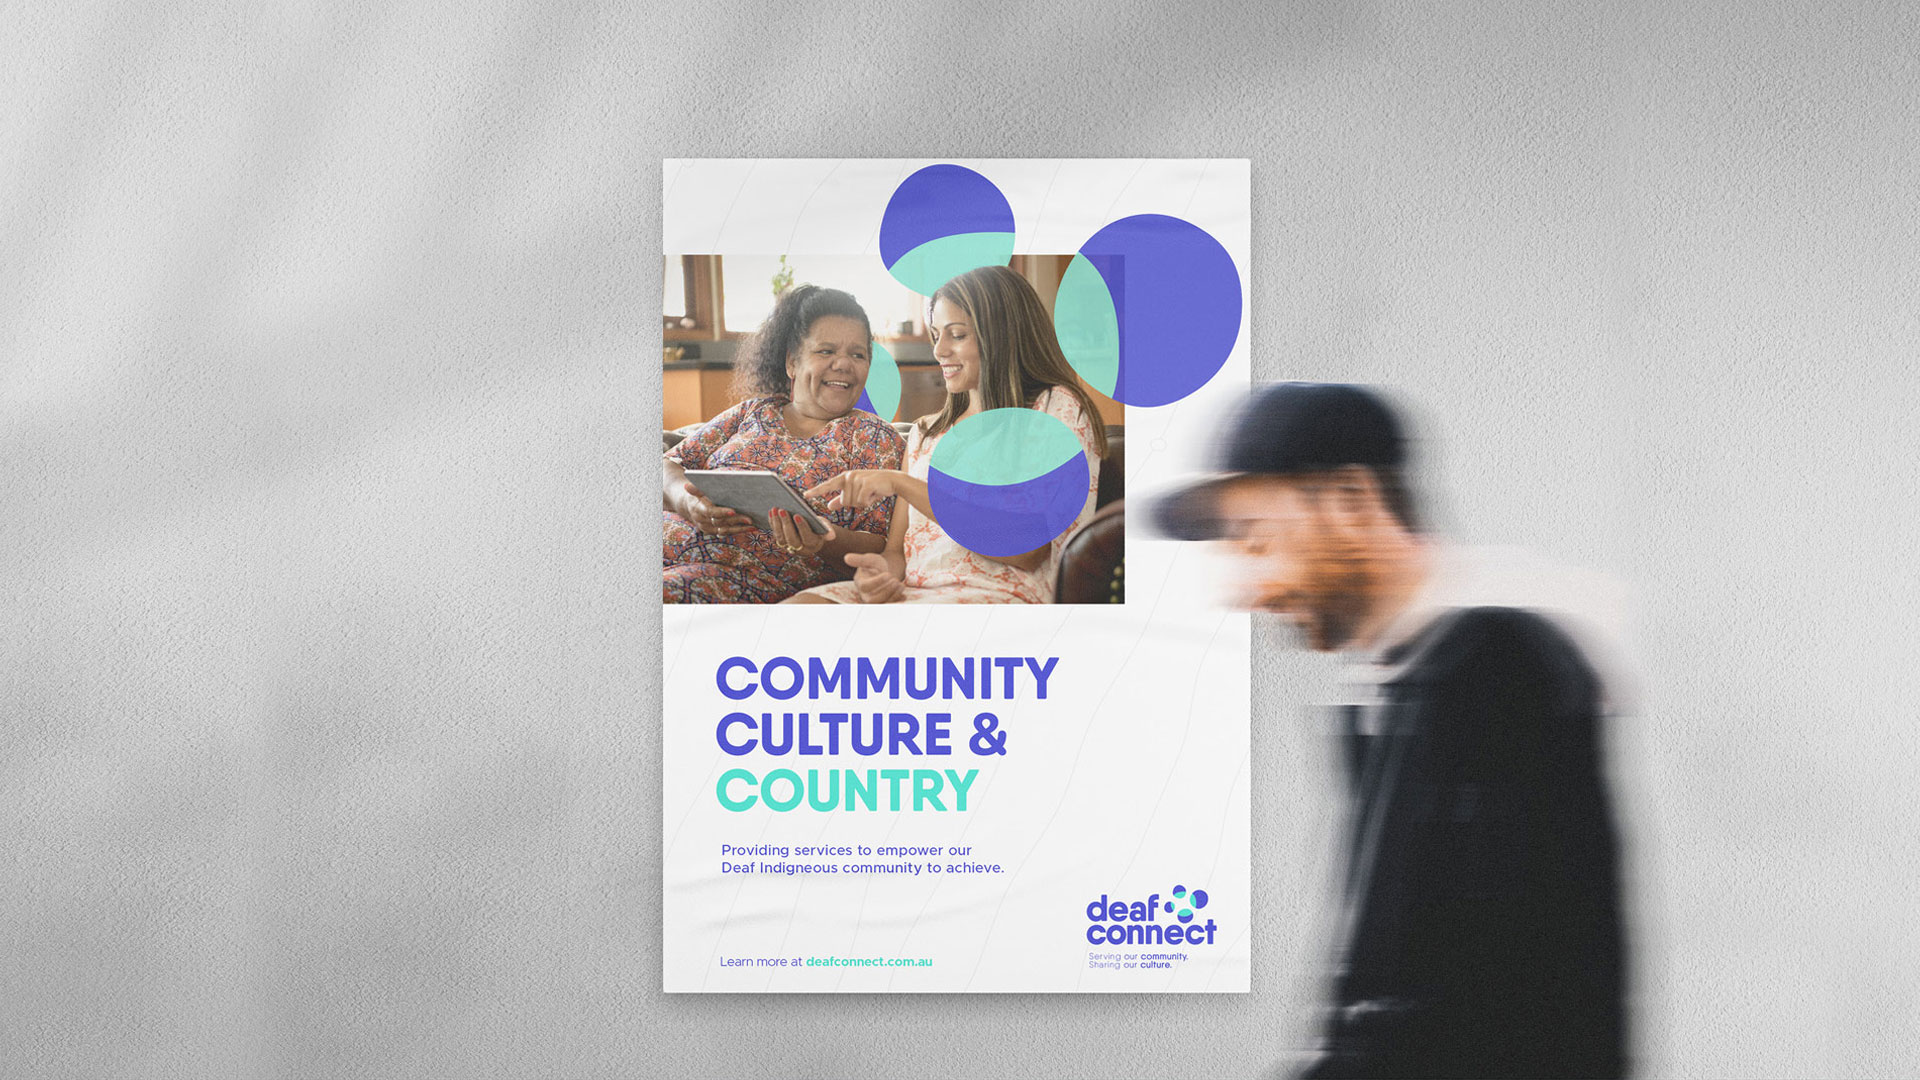 Out of home poster using the new deaf connect brand identity - it says Community, Culture & Country.